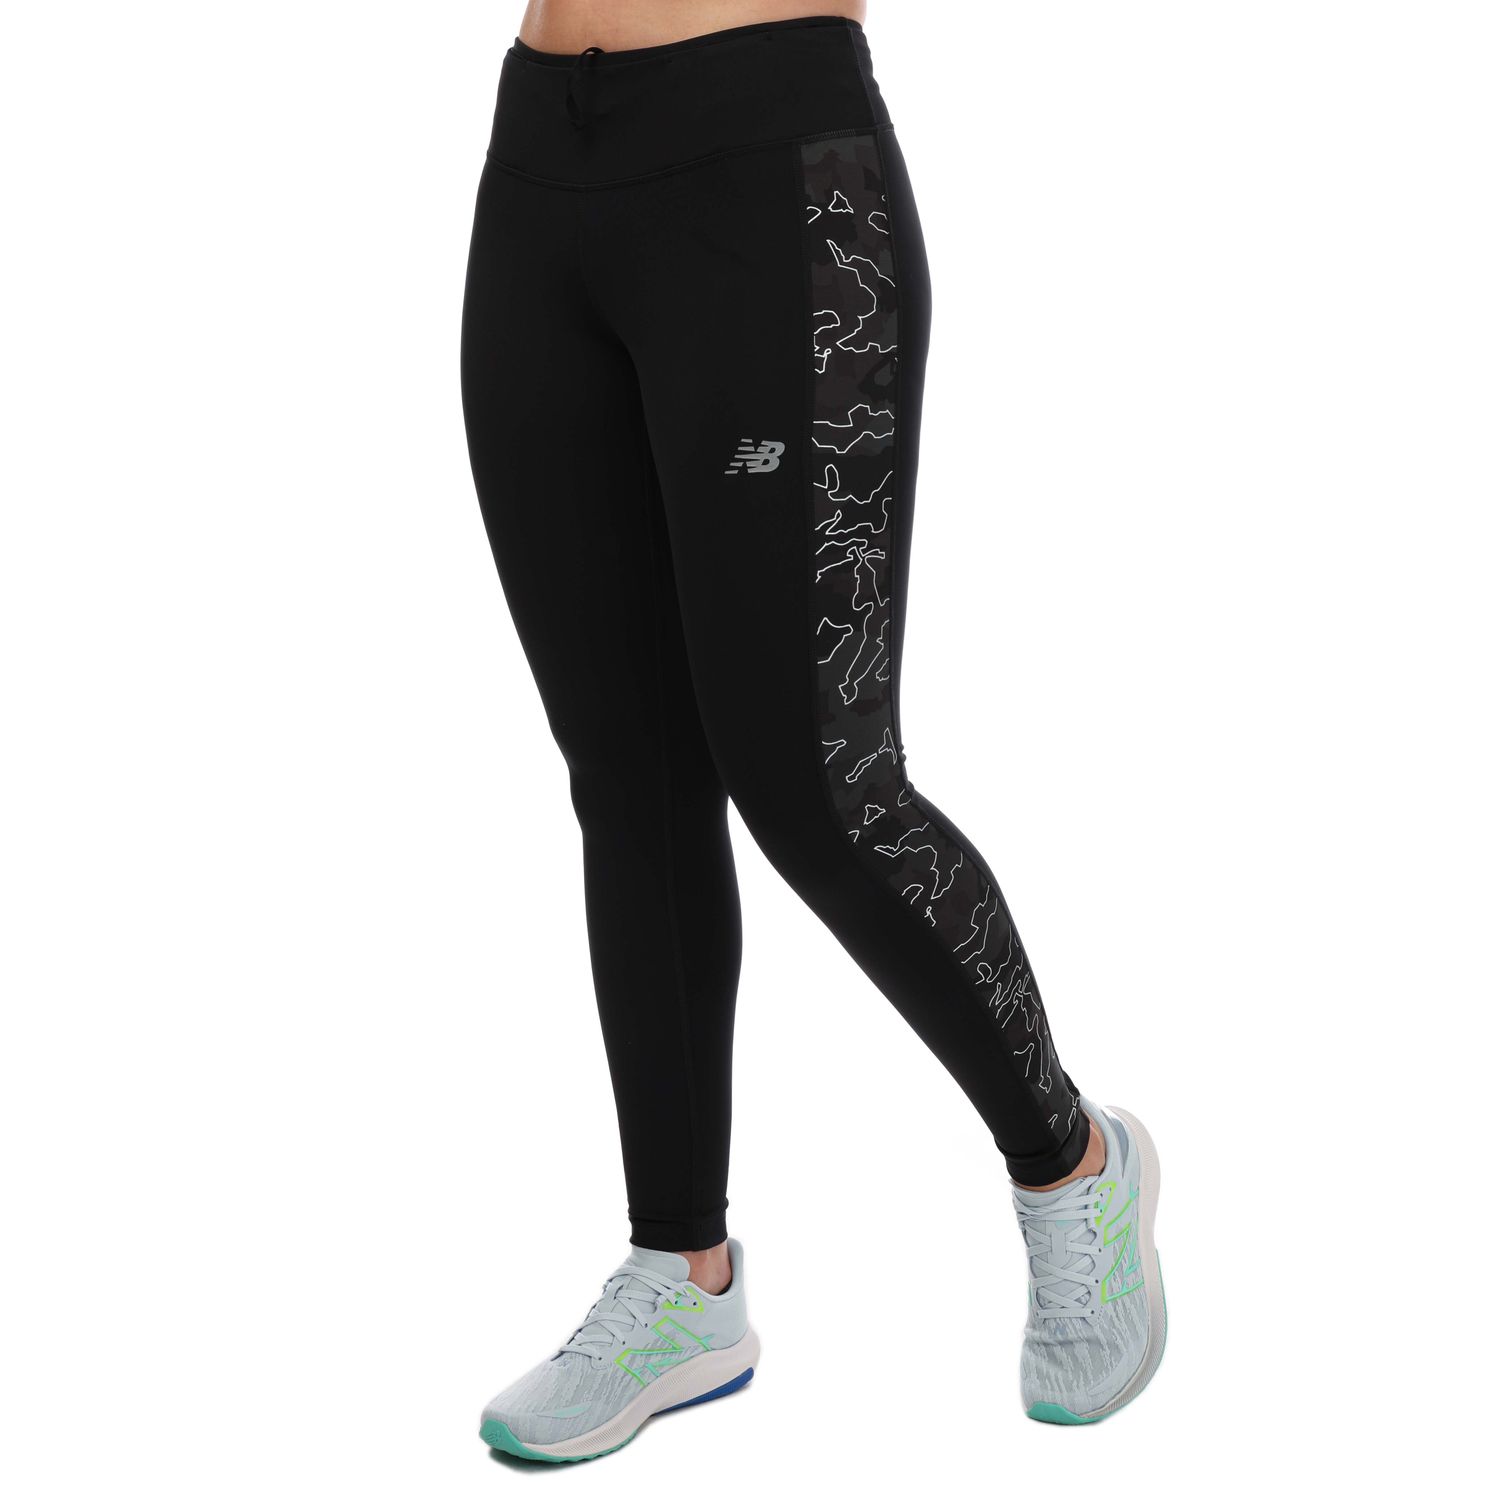 New Balance Womens Reflective Print Accelerate Tights in Charcoal